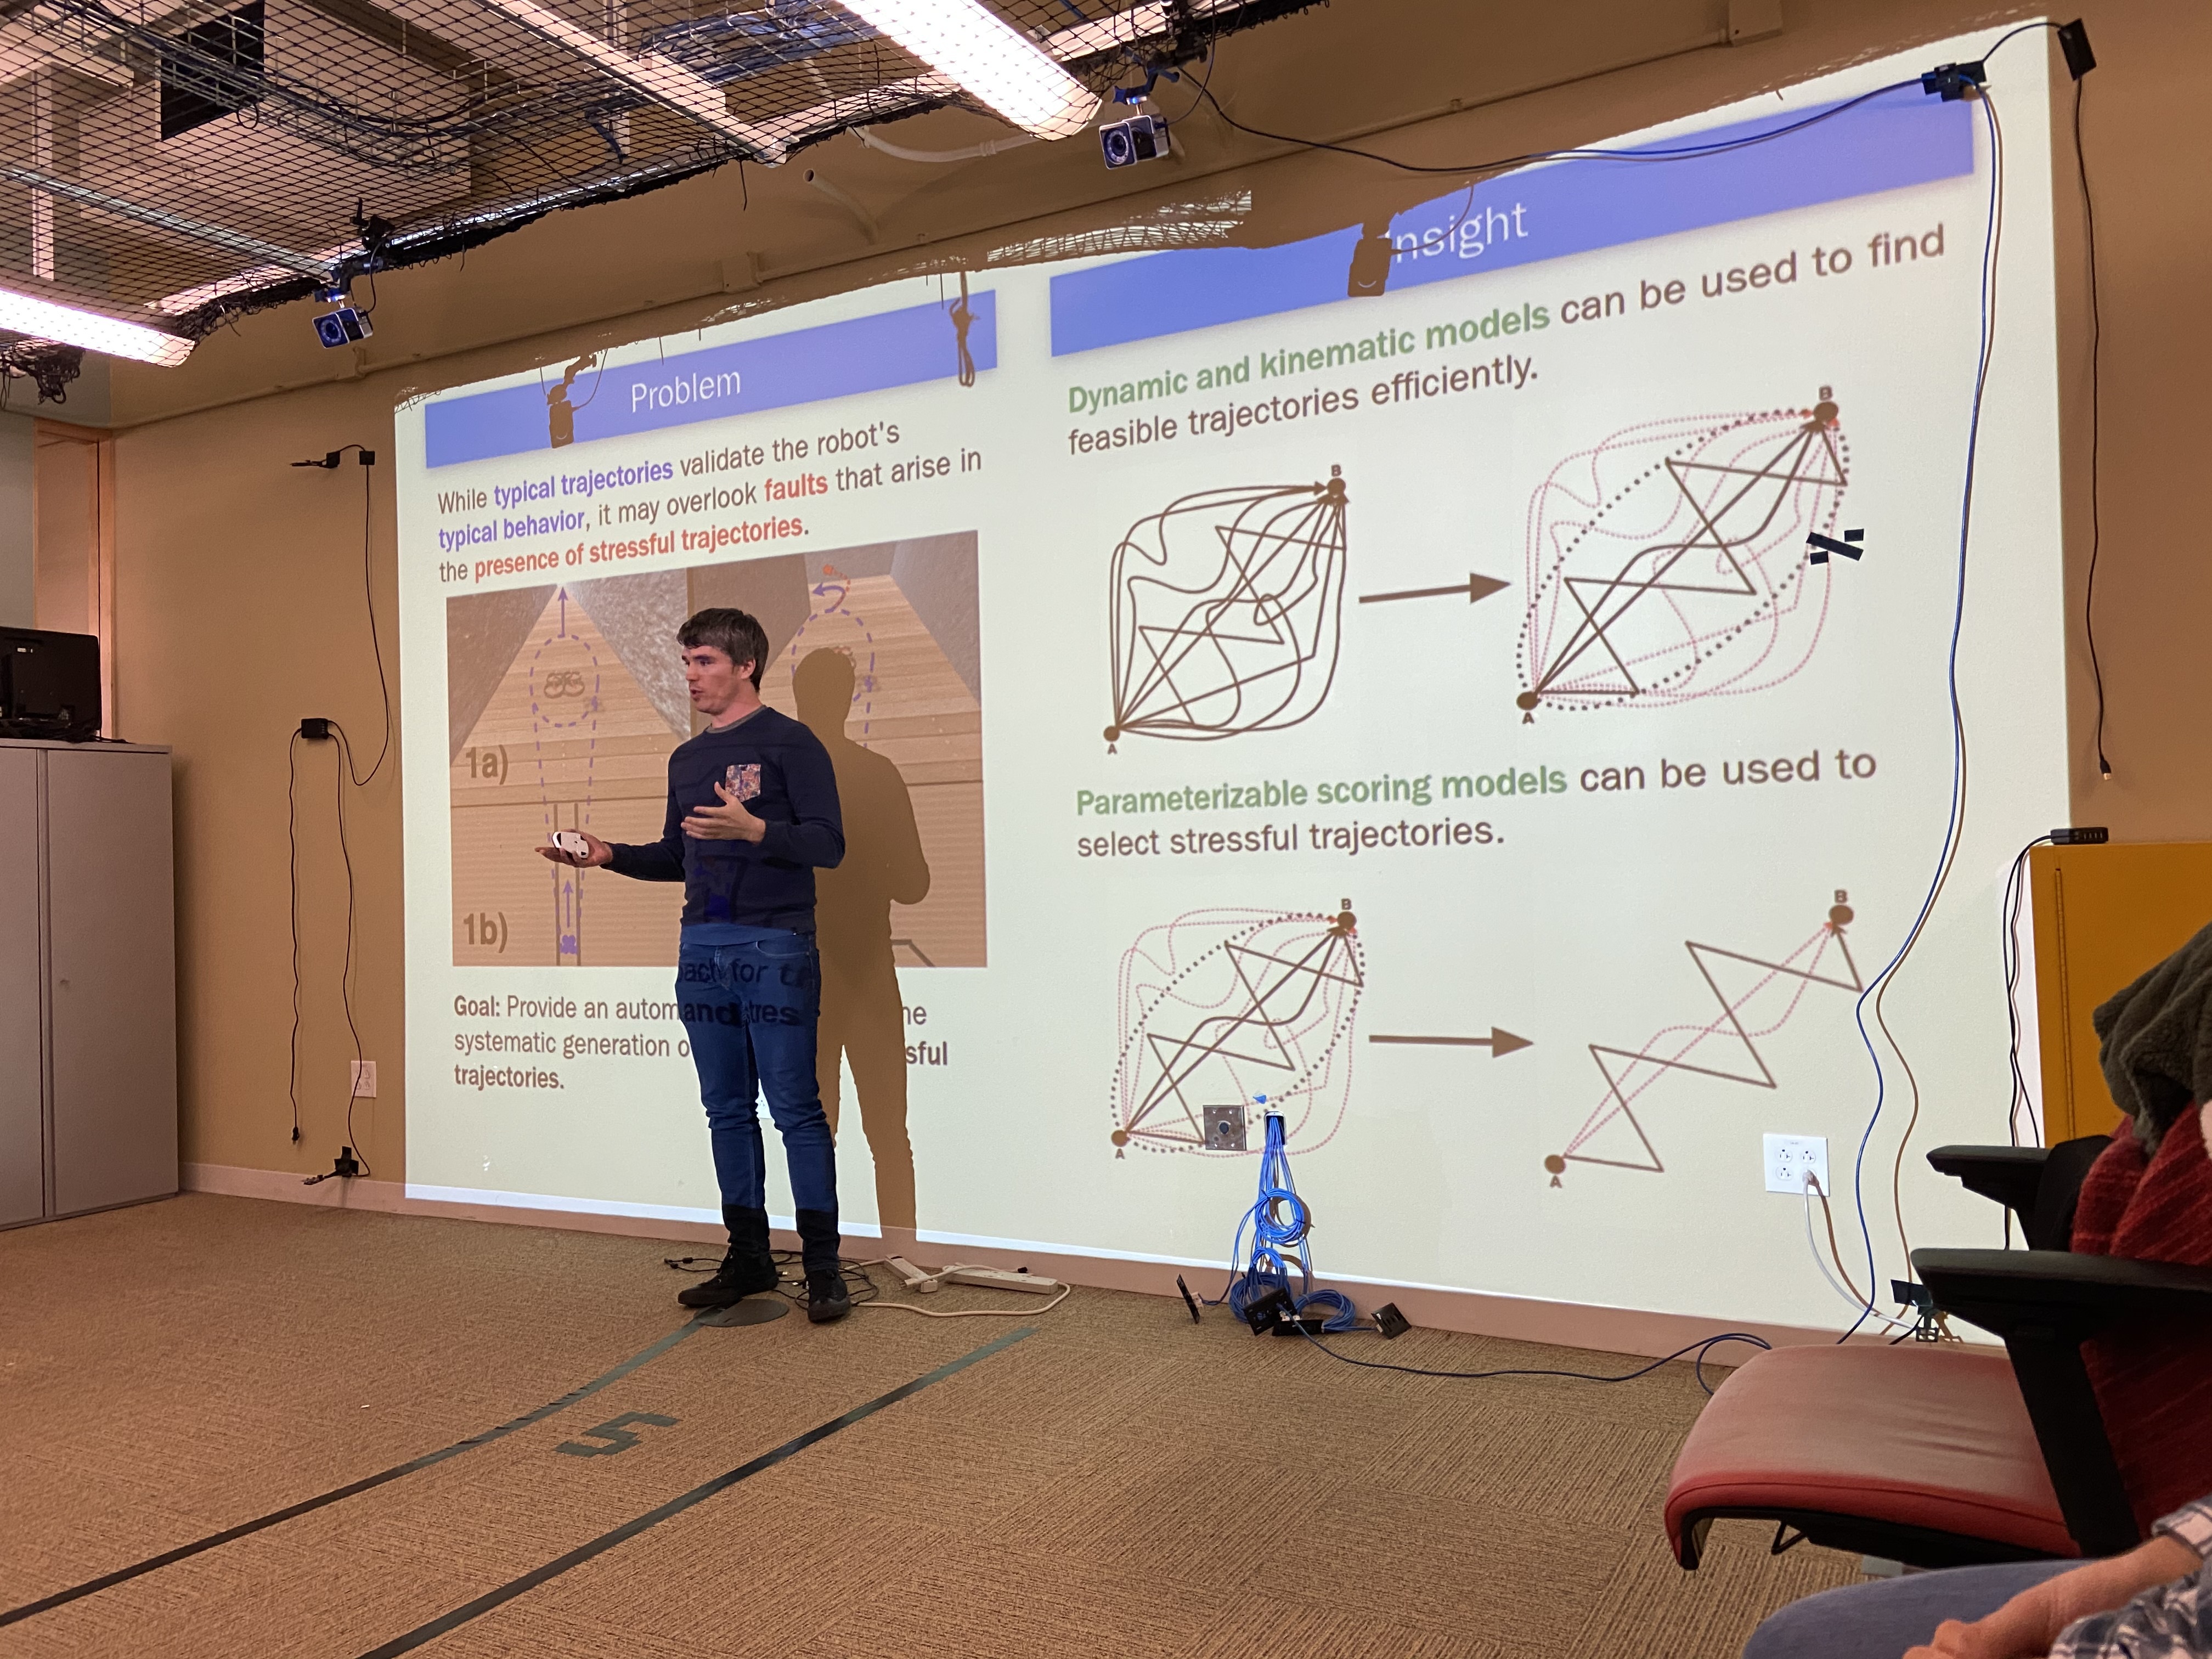 Carl giving a talk on his recently published work on creating stressful trajectories for robots.